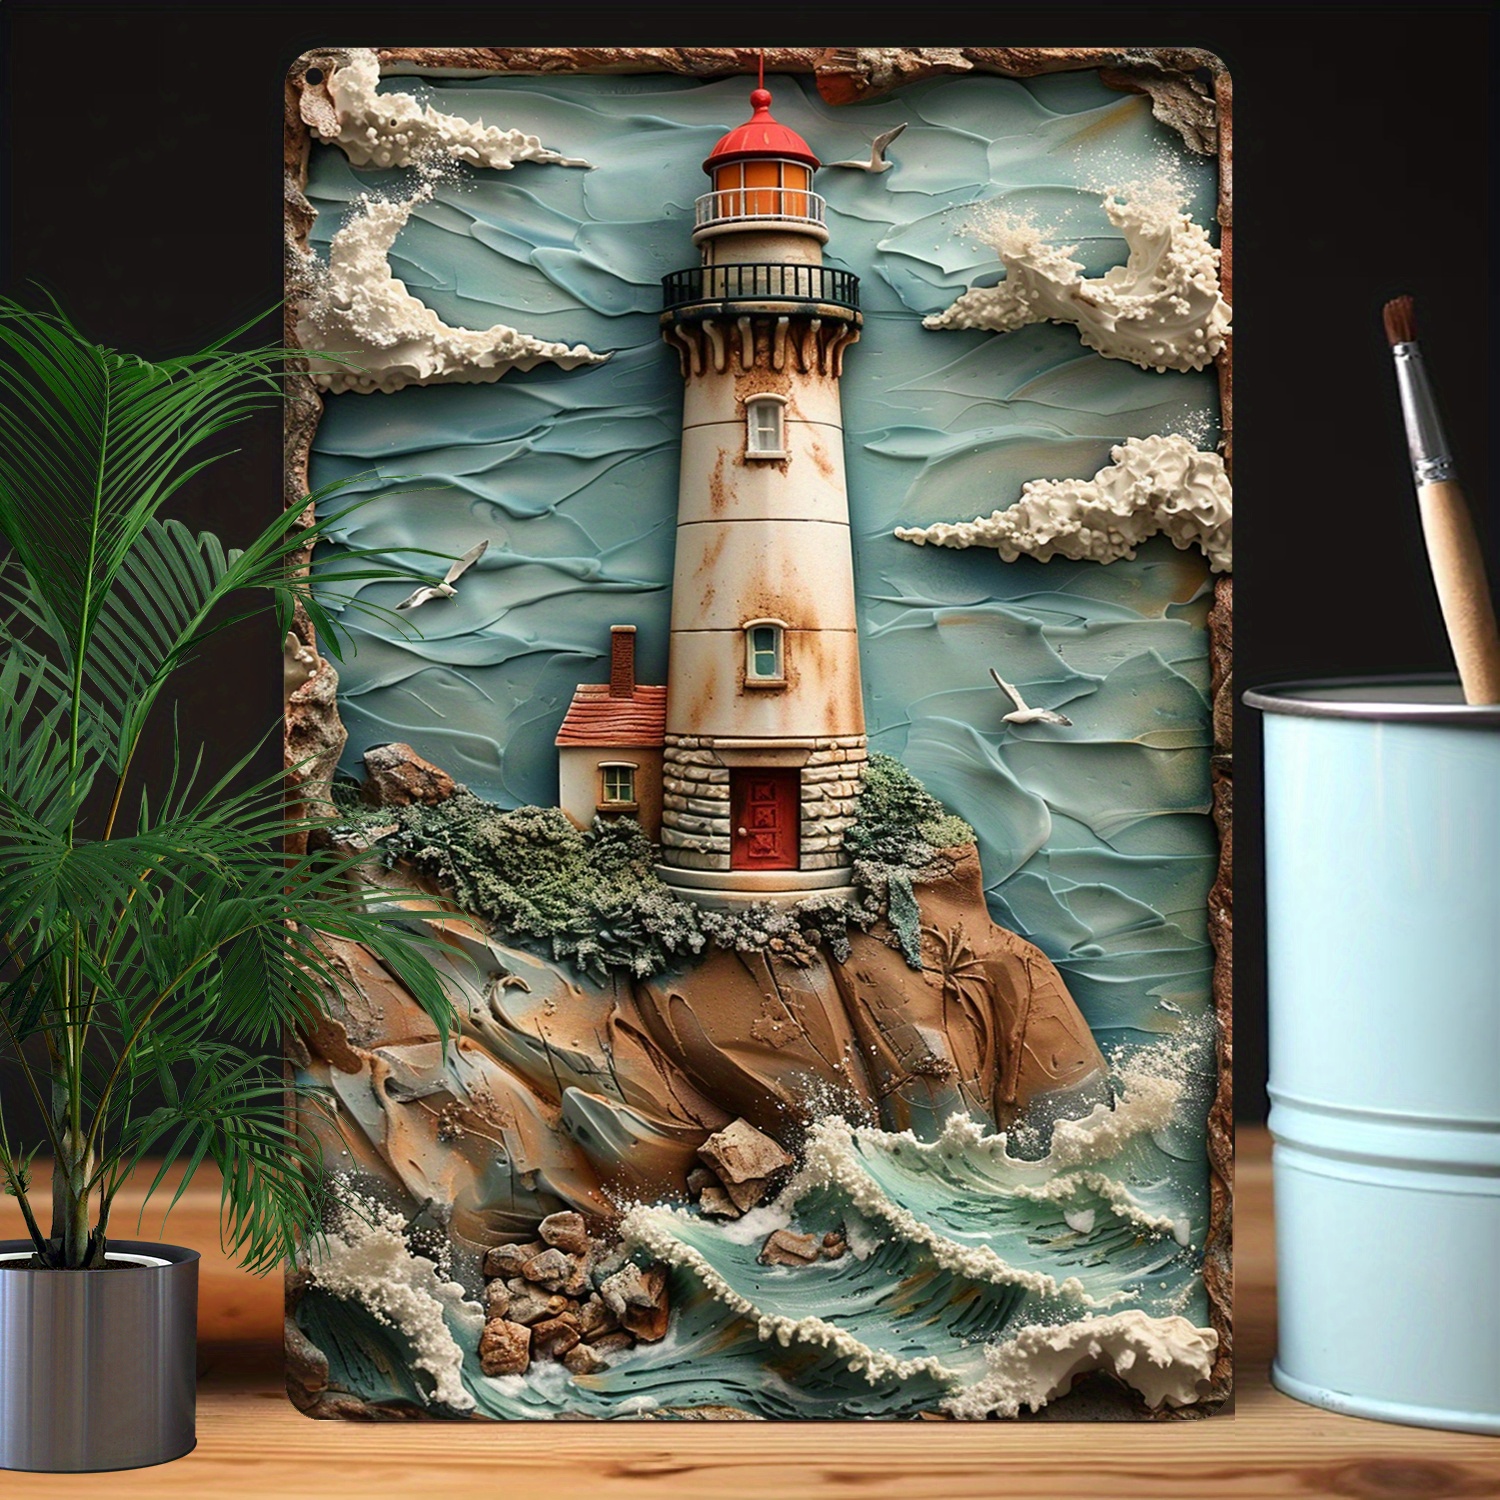 

Charming Lighthouse 8x12" Aluminum Sign - Vintage Spring & Summer Decor For Home, Gym, Bathroom, Garden, Studio, Classroom - Perfect Mother's Day Gift